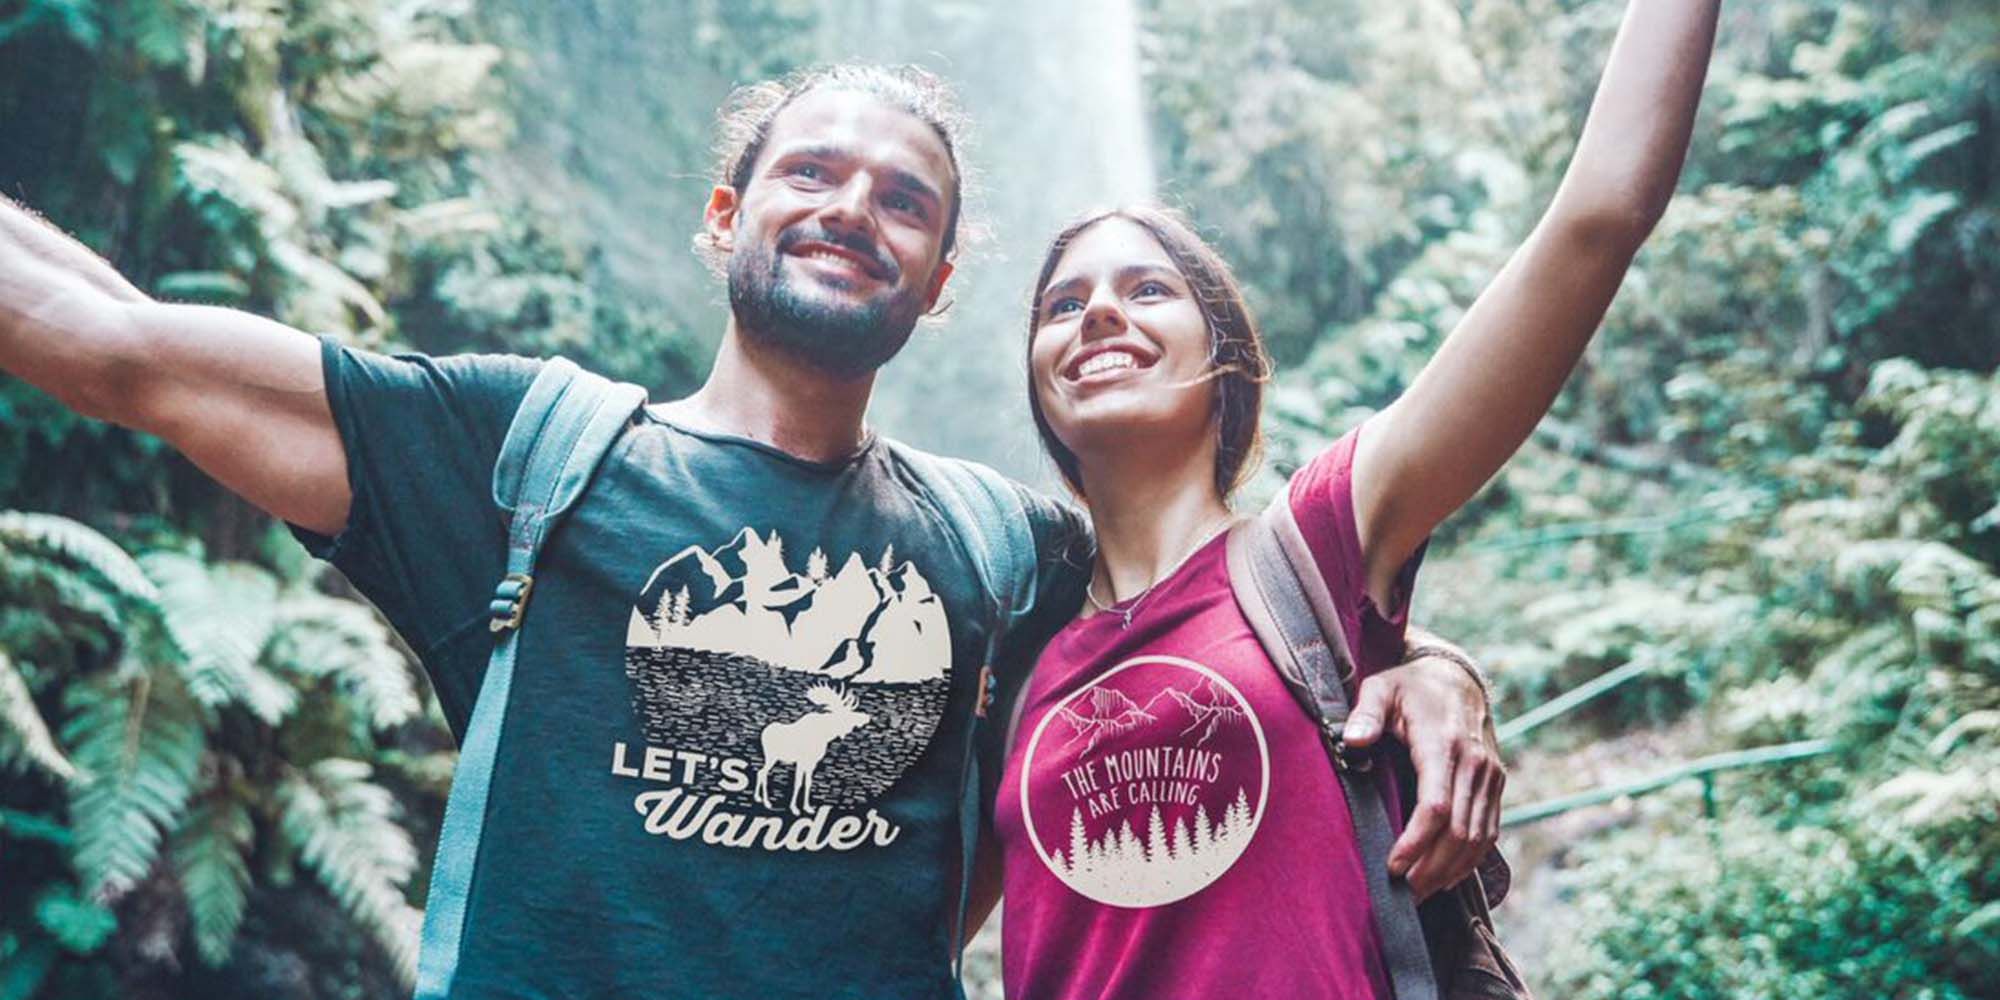 A couple wearing cool merch in the forest